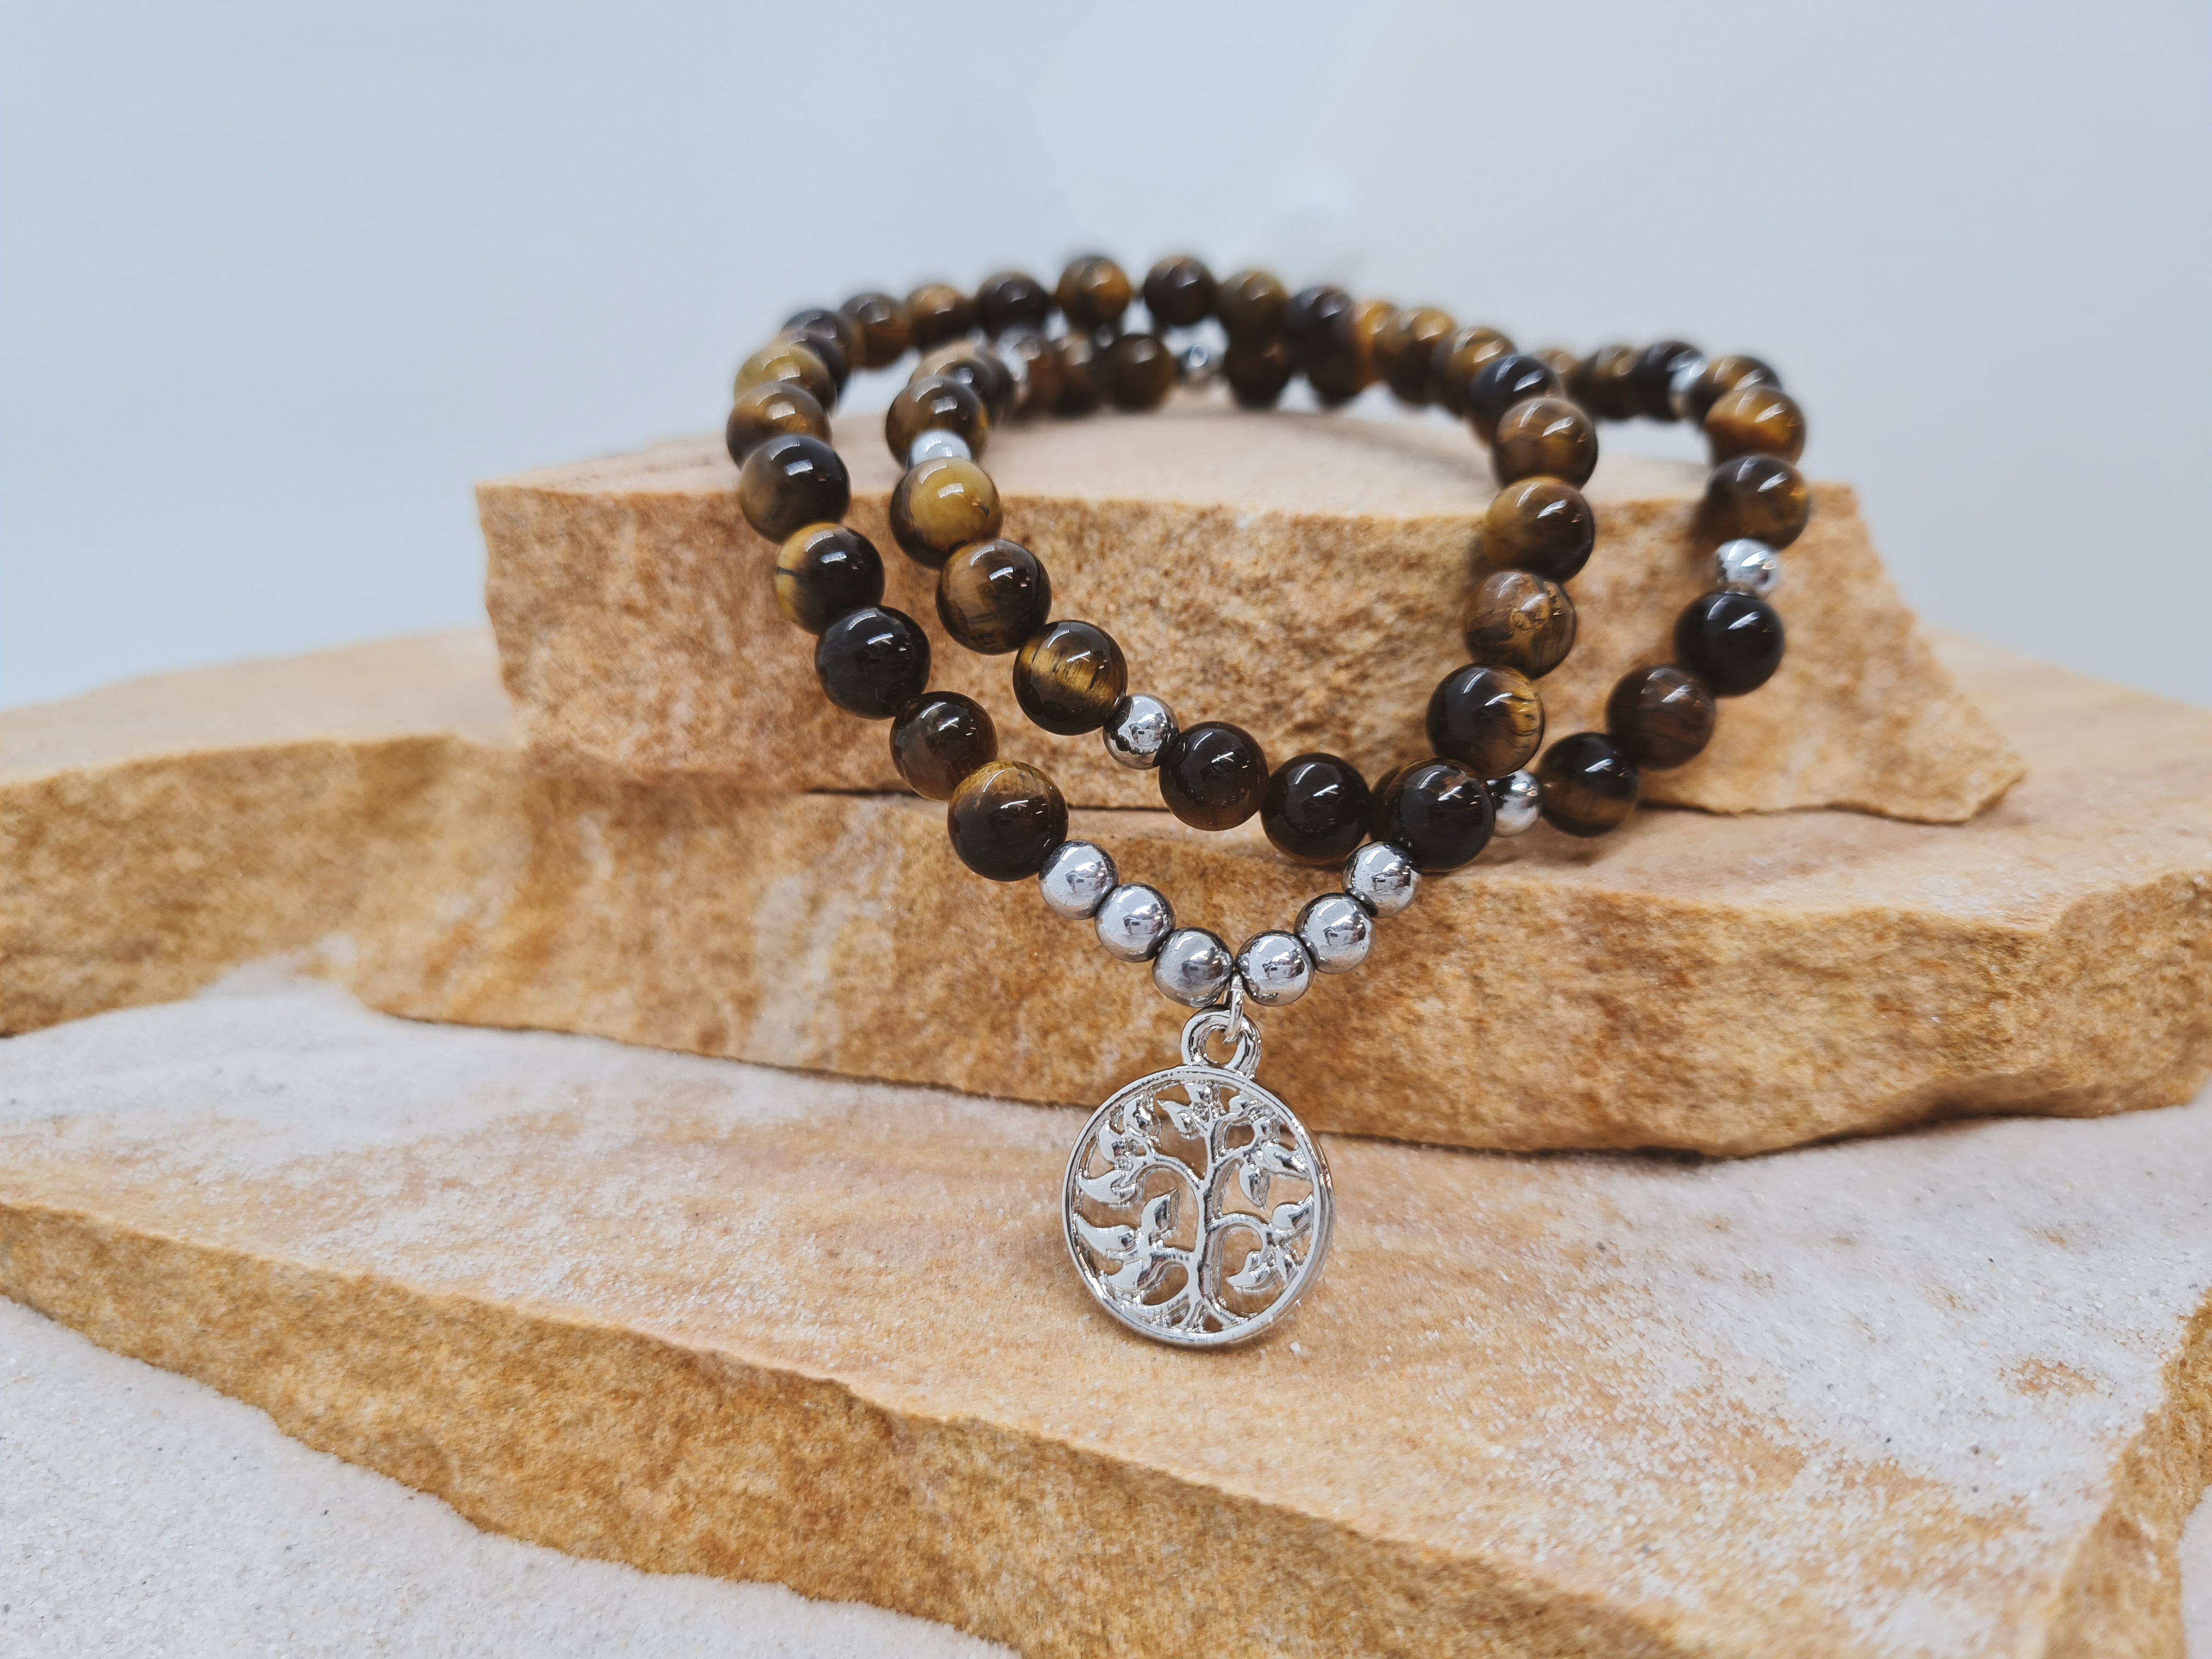 Gold Tiger's Eye 8mm crystal bead bracelet with silver tree of life charm